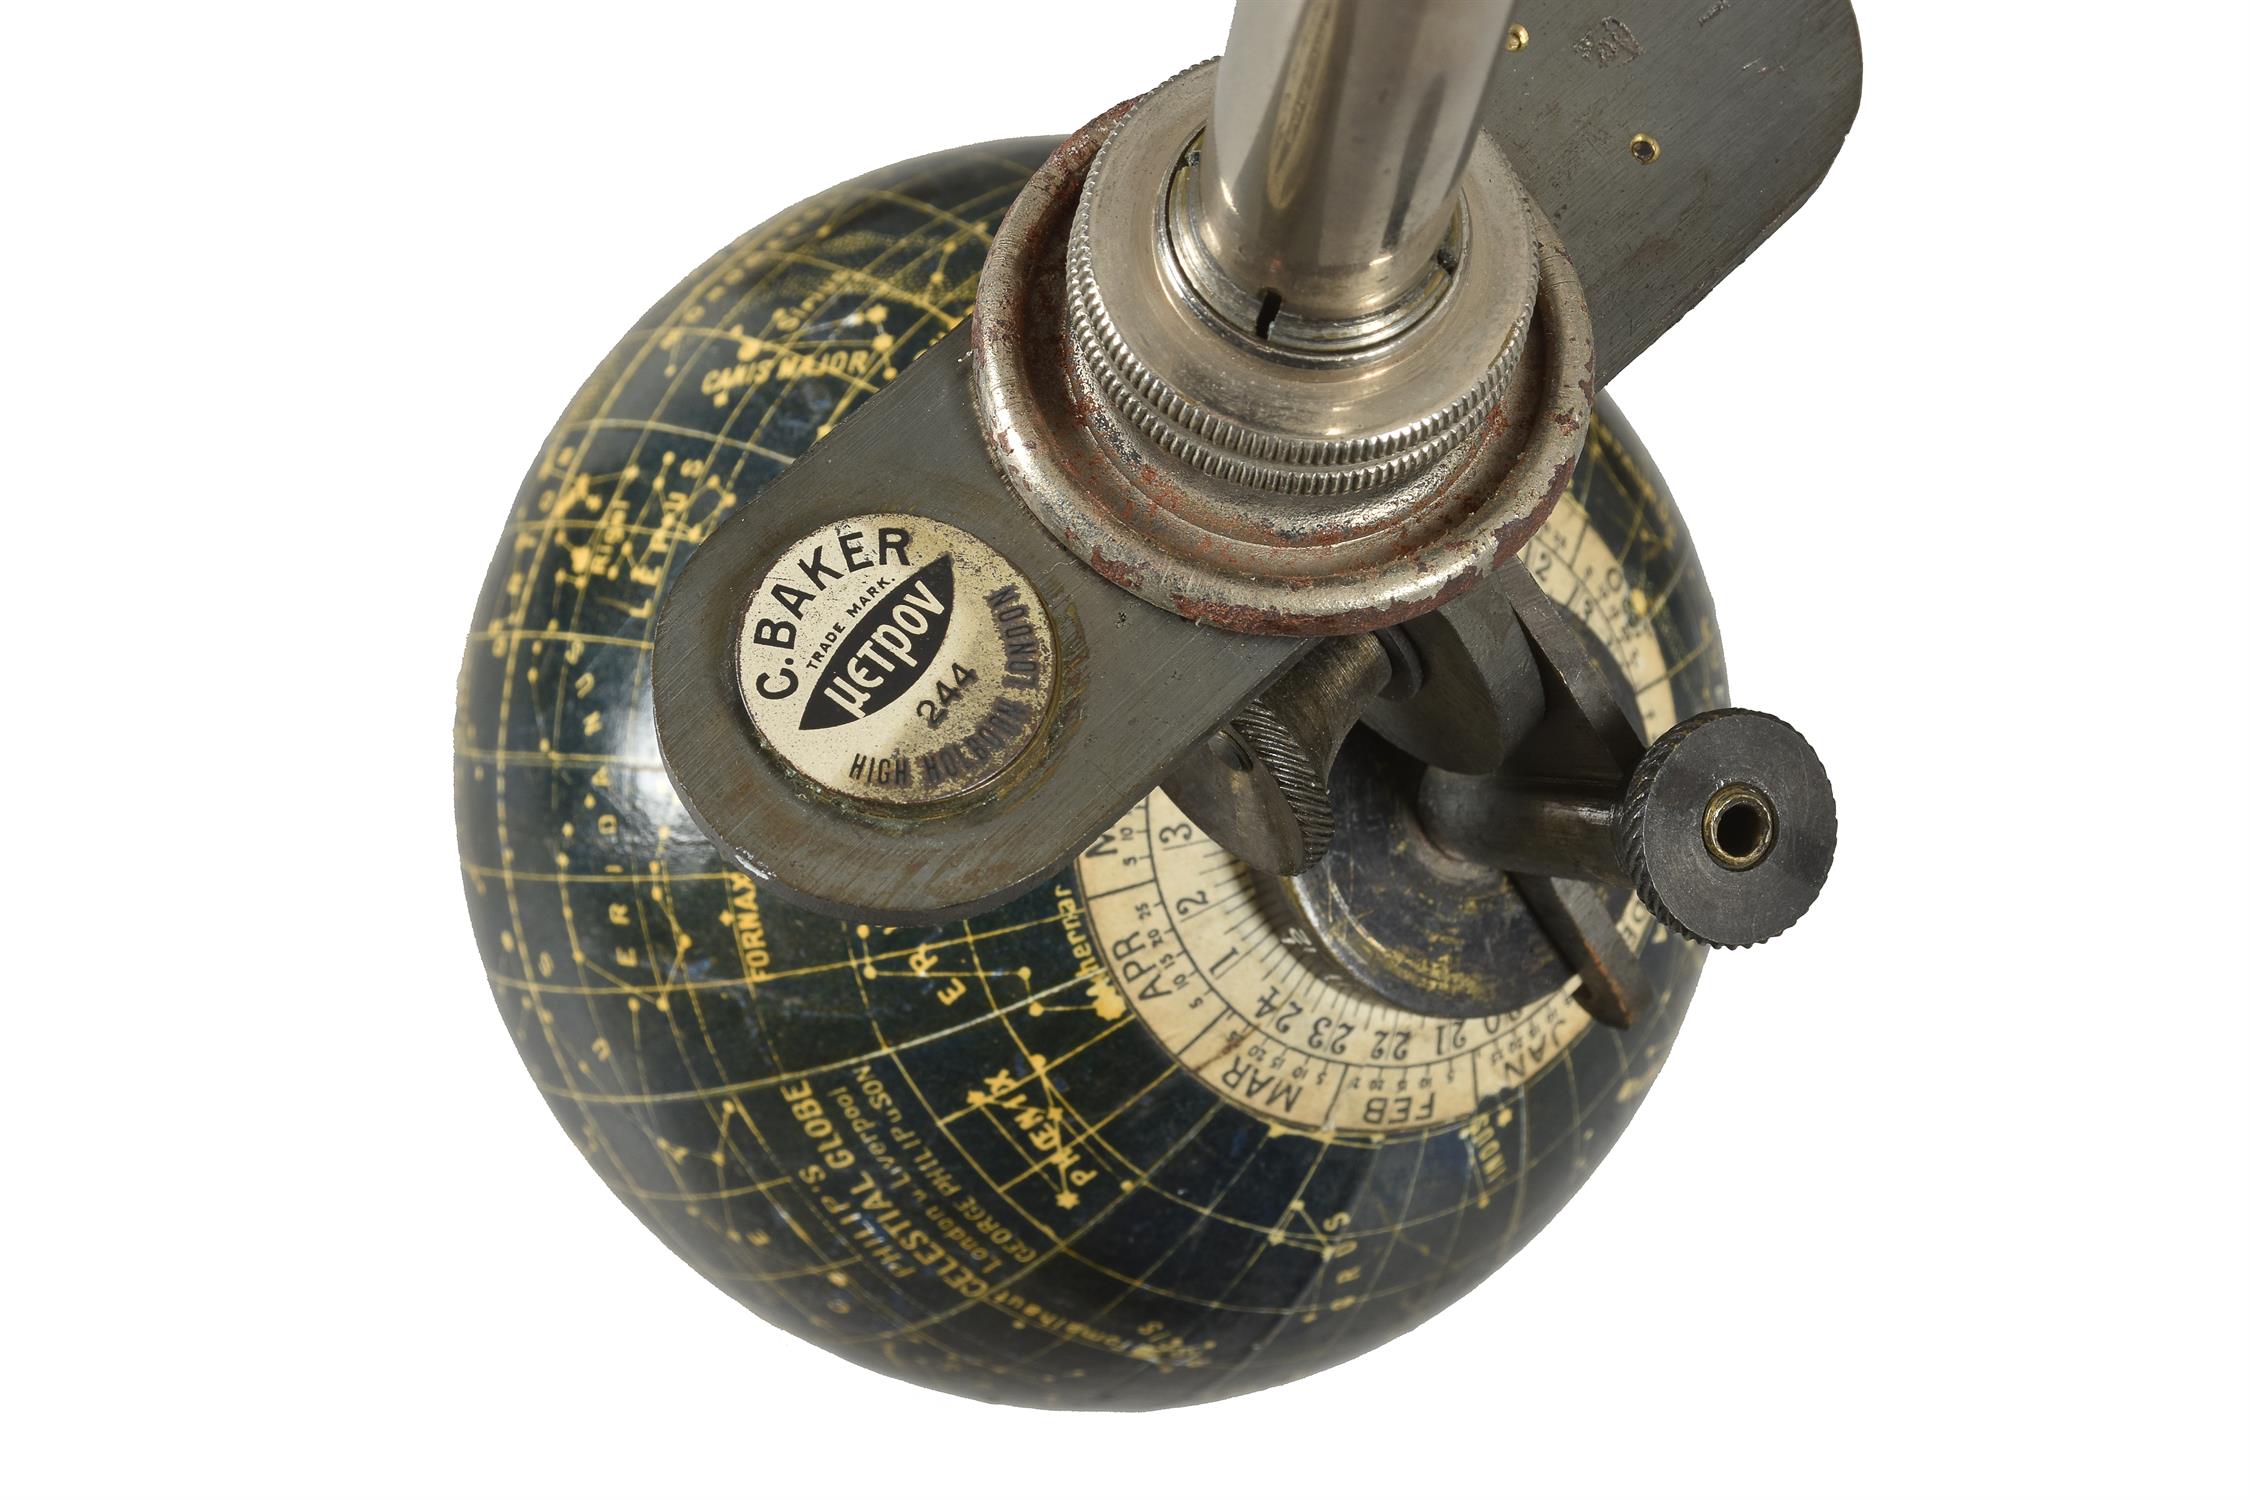 An unusual 4 inch celestial globe, C. Baker, London, early 20th century - Image 7 of 7